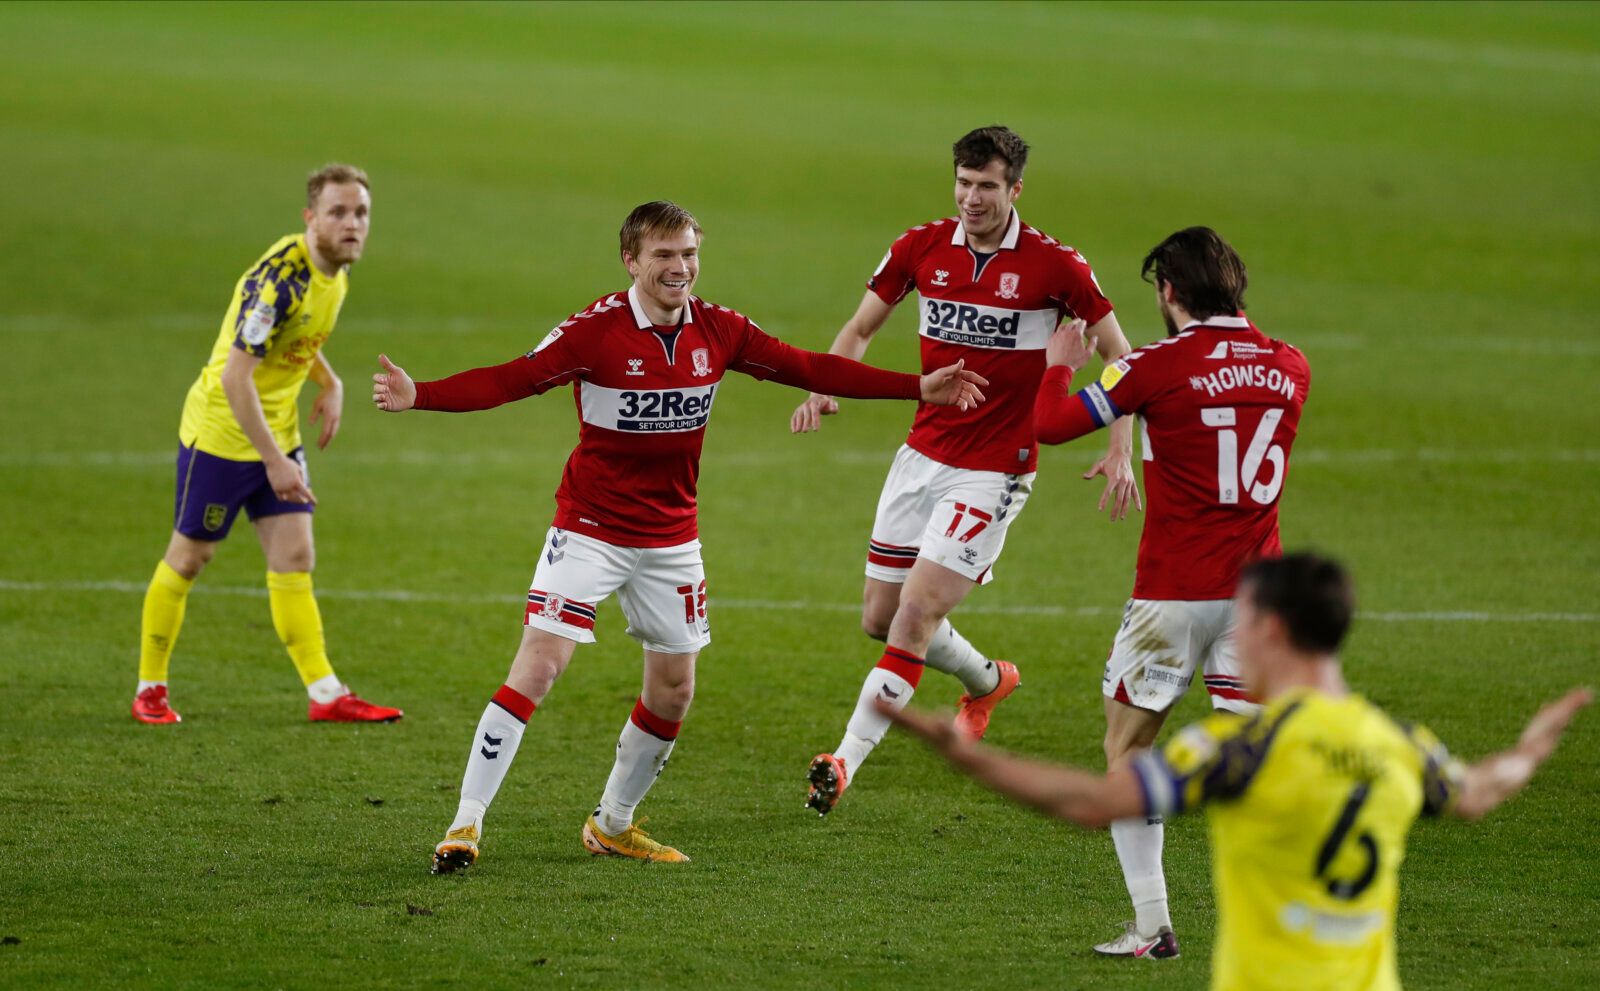 Soccer Football - Championship - Middlesbrough v Huddersfield Town - Riverside Stadium, Middlesbrough, Britain - February 16, 2021  Middlesbrough's Duncan Watmore celebrates scoring their first goal Action Images/Lee Smith EDITORIAL USE ONLY. No use with unauthorized audio, video, data, fixture lists, club/league logos or 'live' services. Online in-match use limited to 75 images, no video emulation. No use in betting, games or single club /league/player publications.  Please contact your account